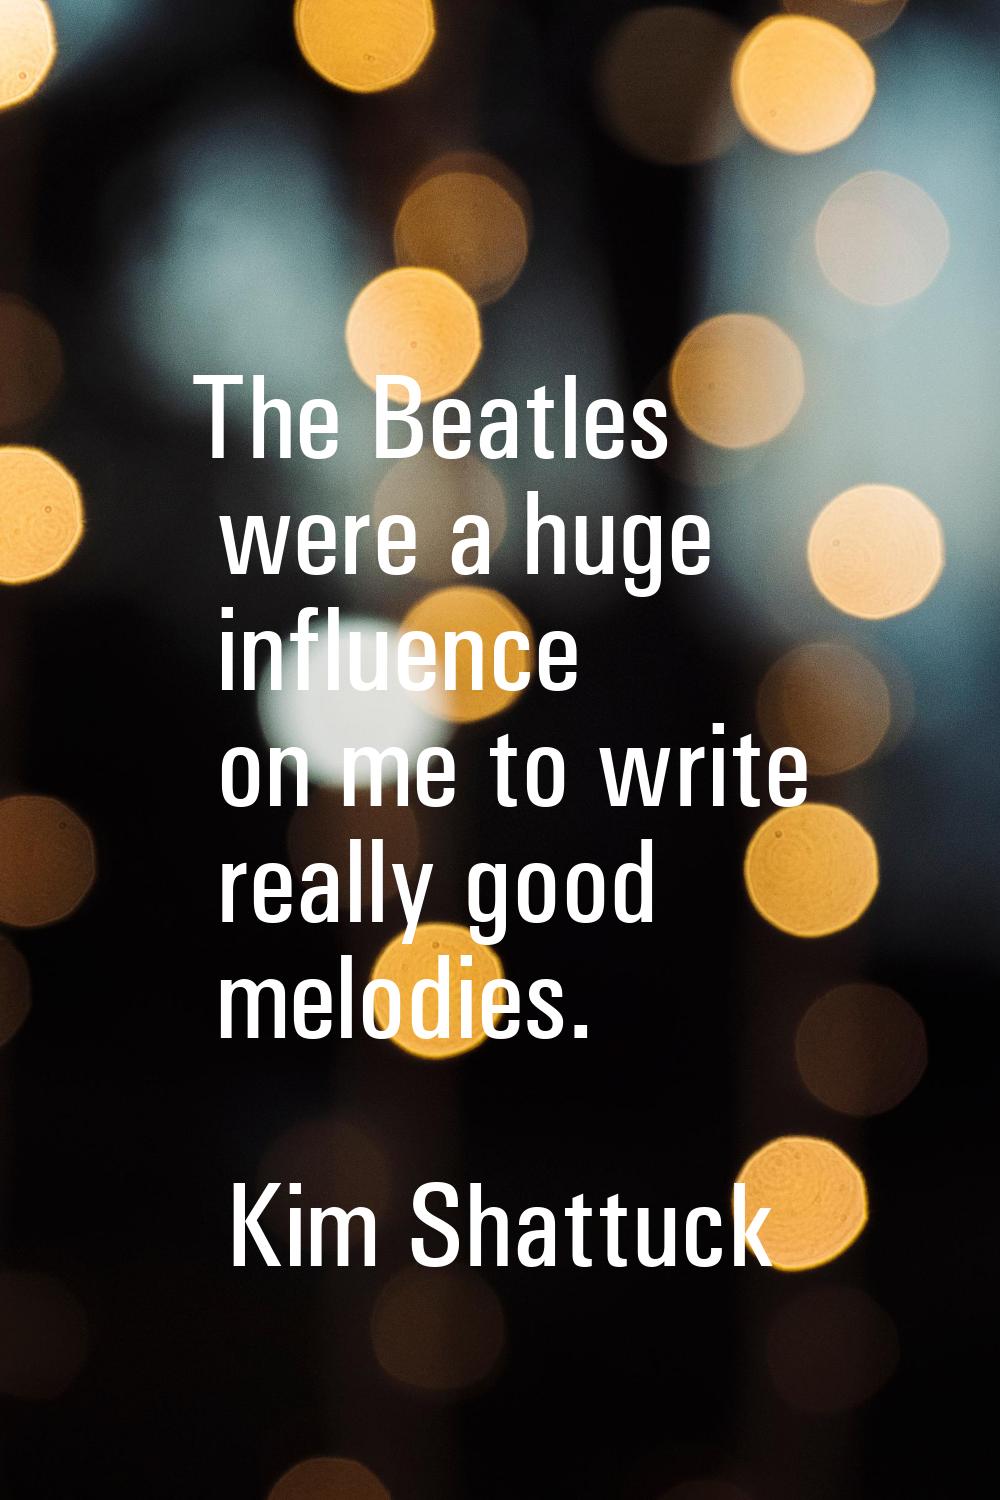 The Beatles were a huge influence on me to write really good melodies.